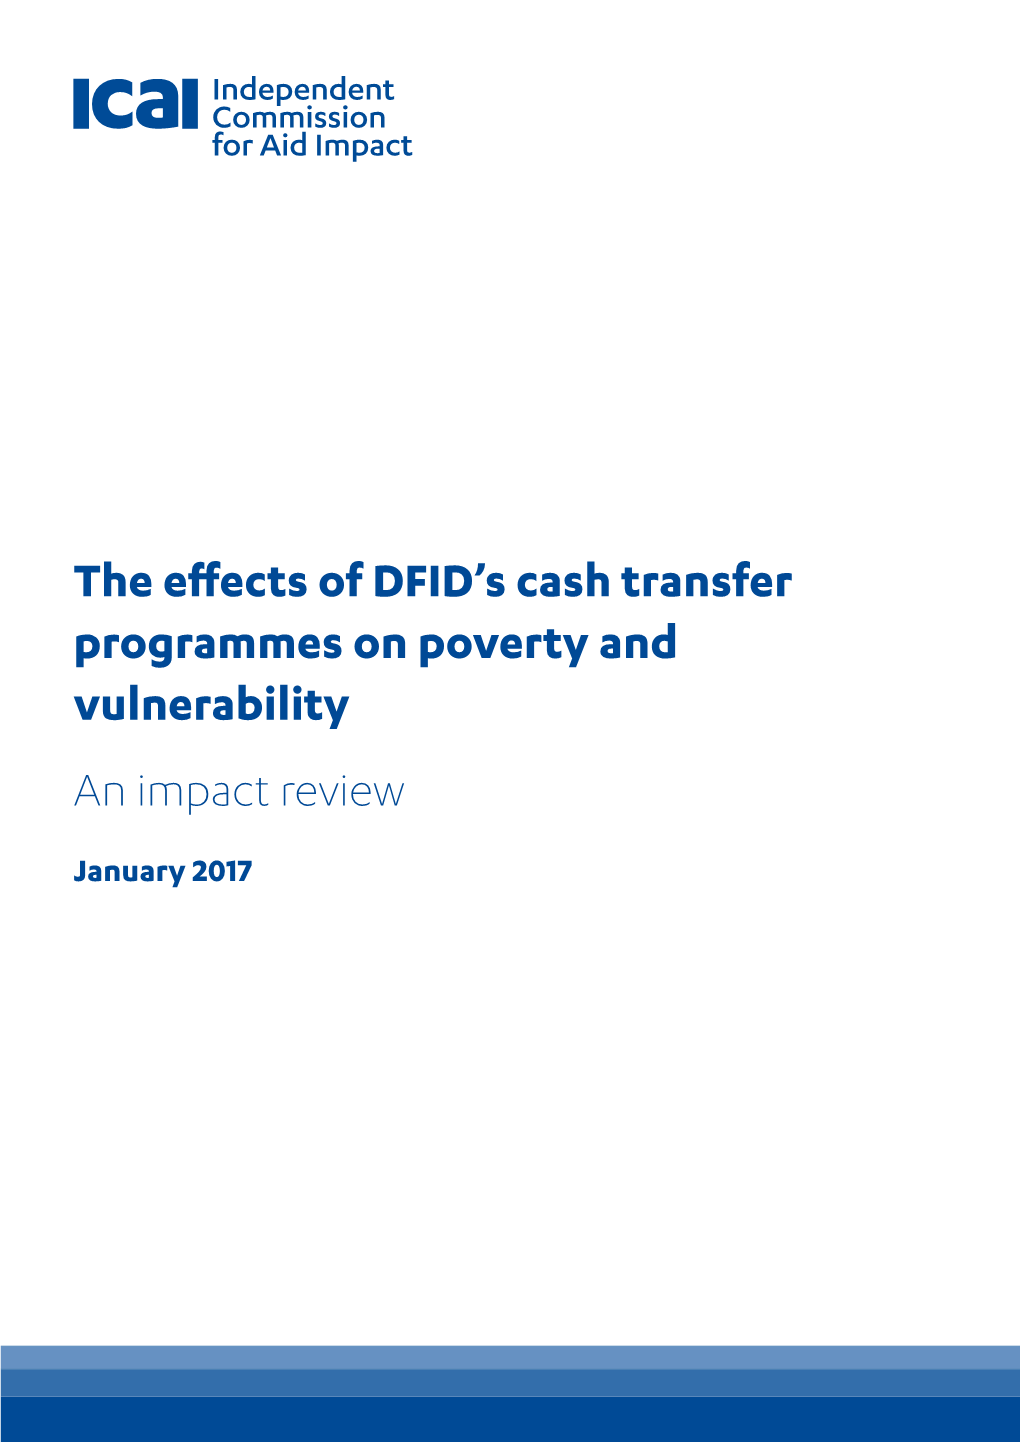 The Effects of DFID's Cash Transfer Programmes on Poverty